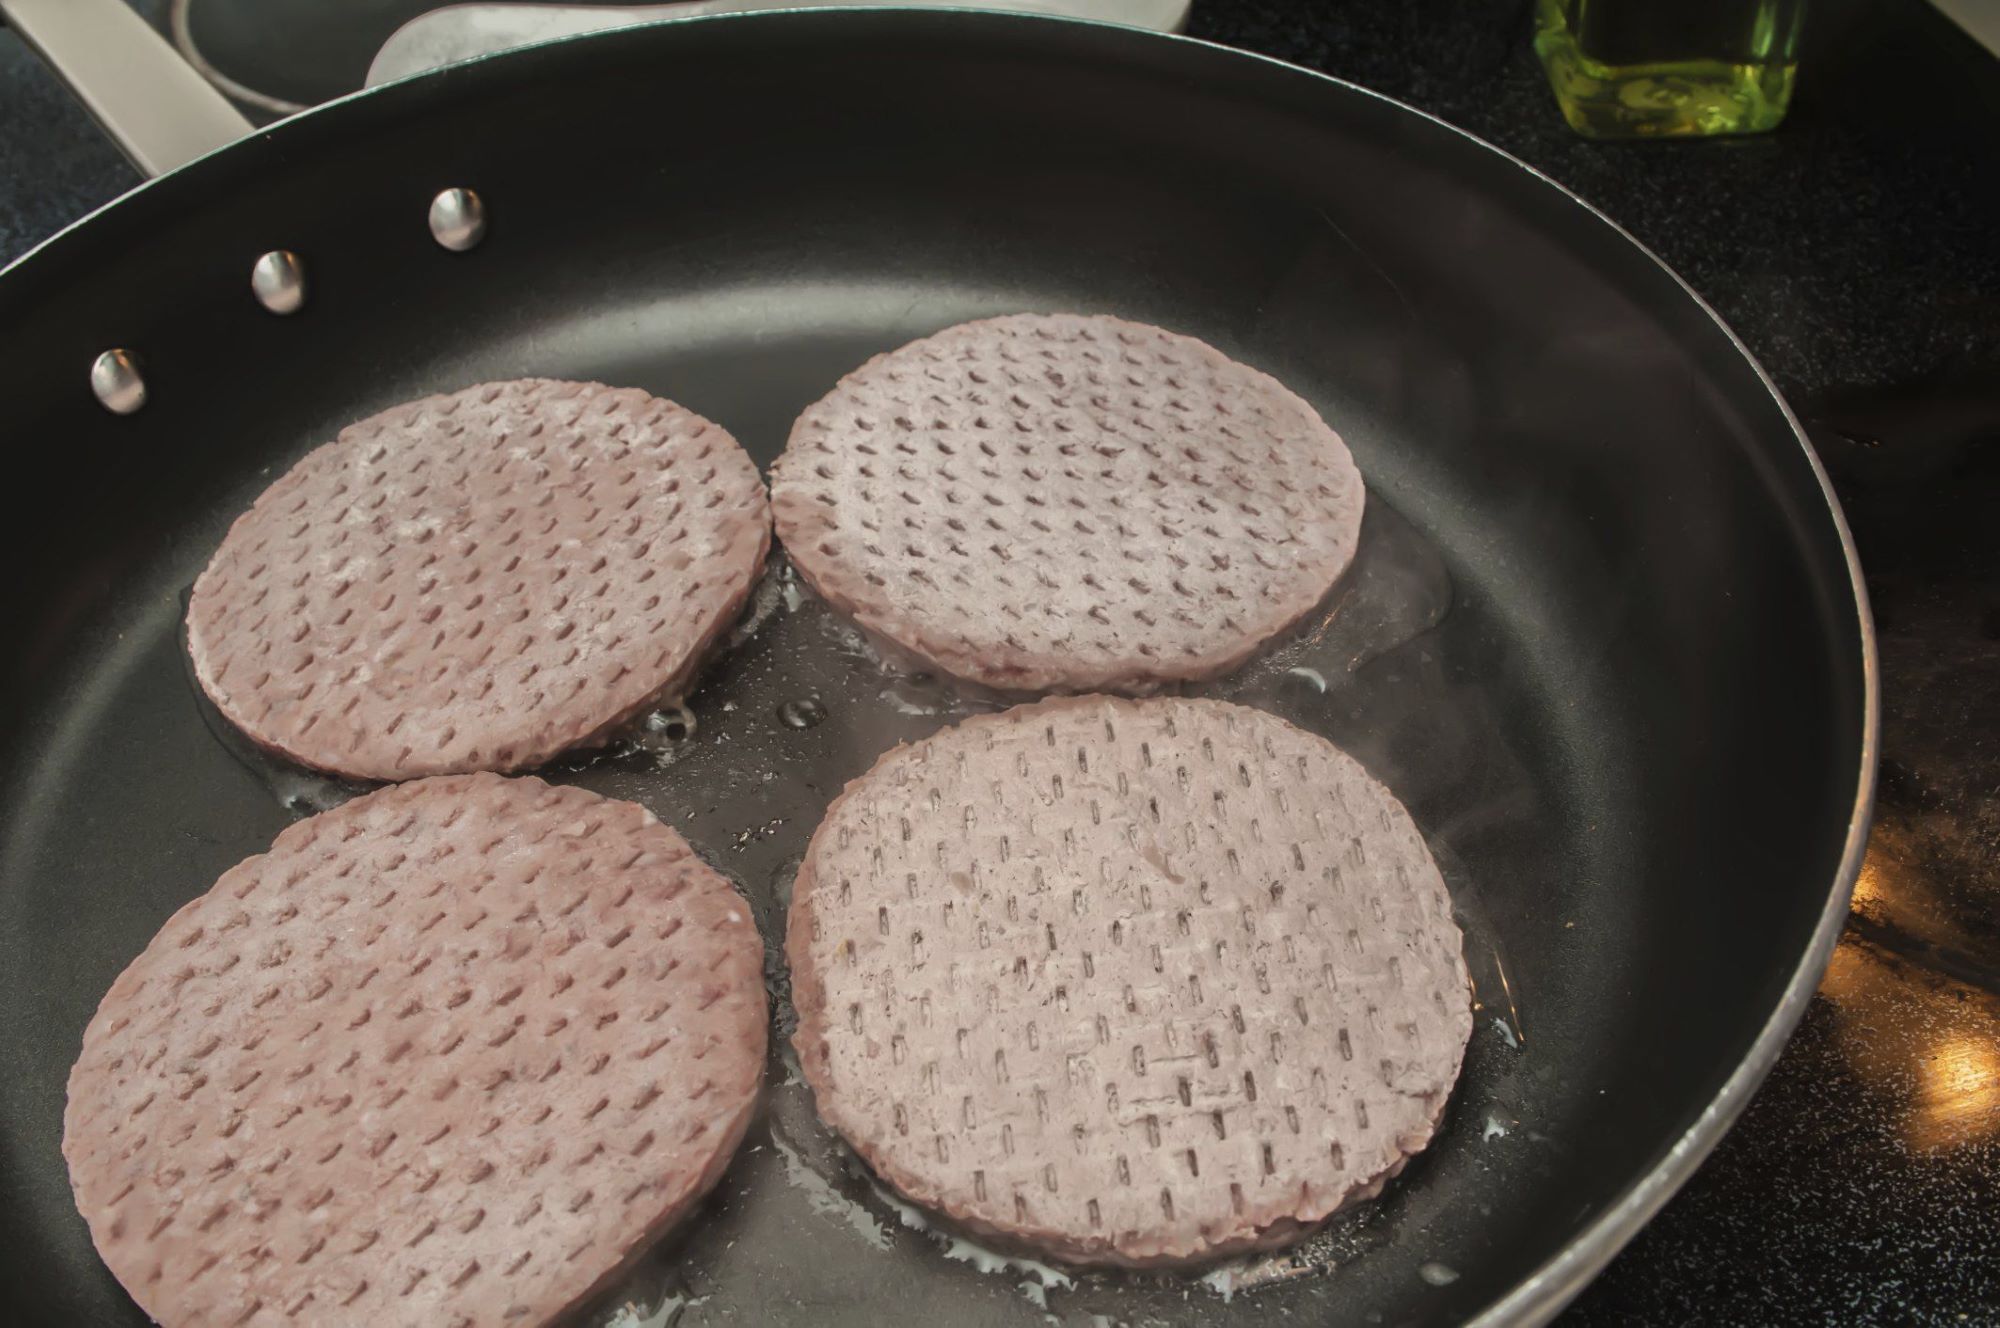 How to make Burger Patties in the Skillet (No Grill) - Savory Experiments